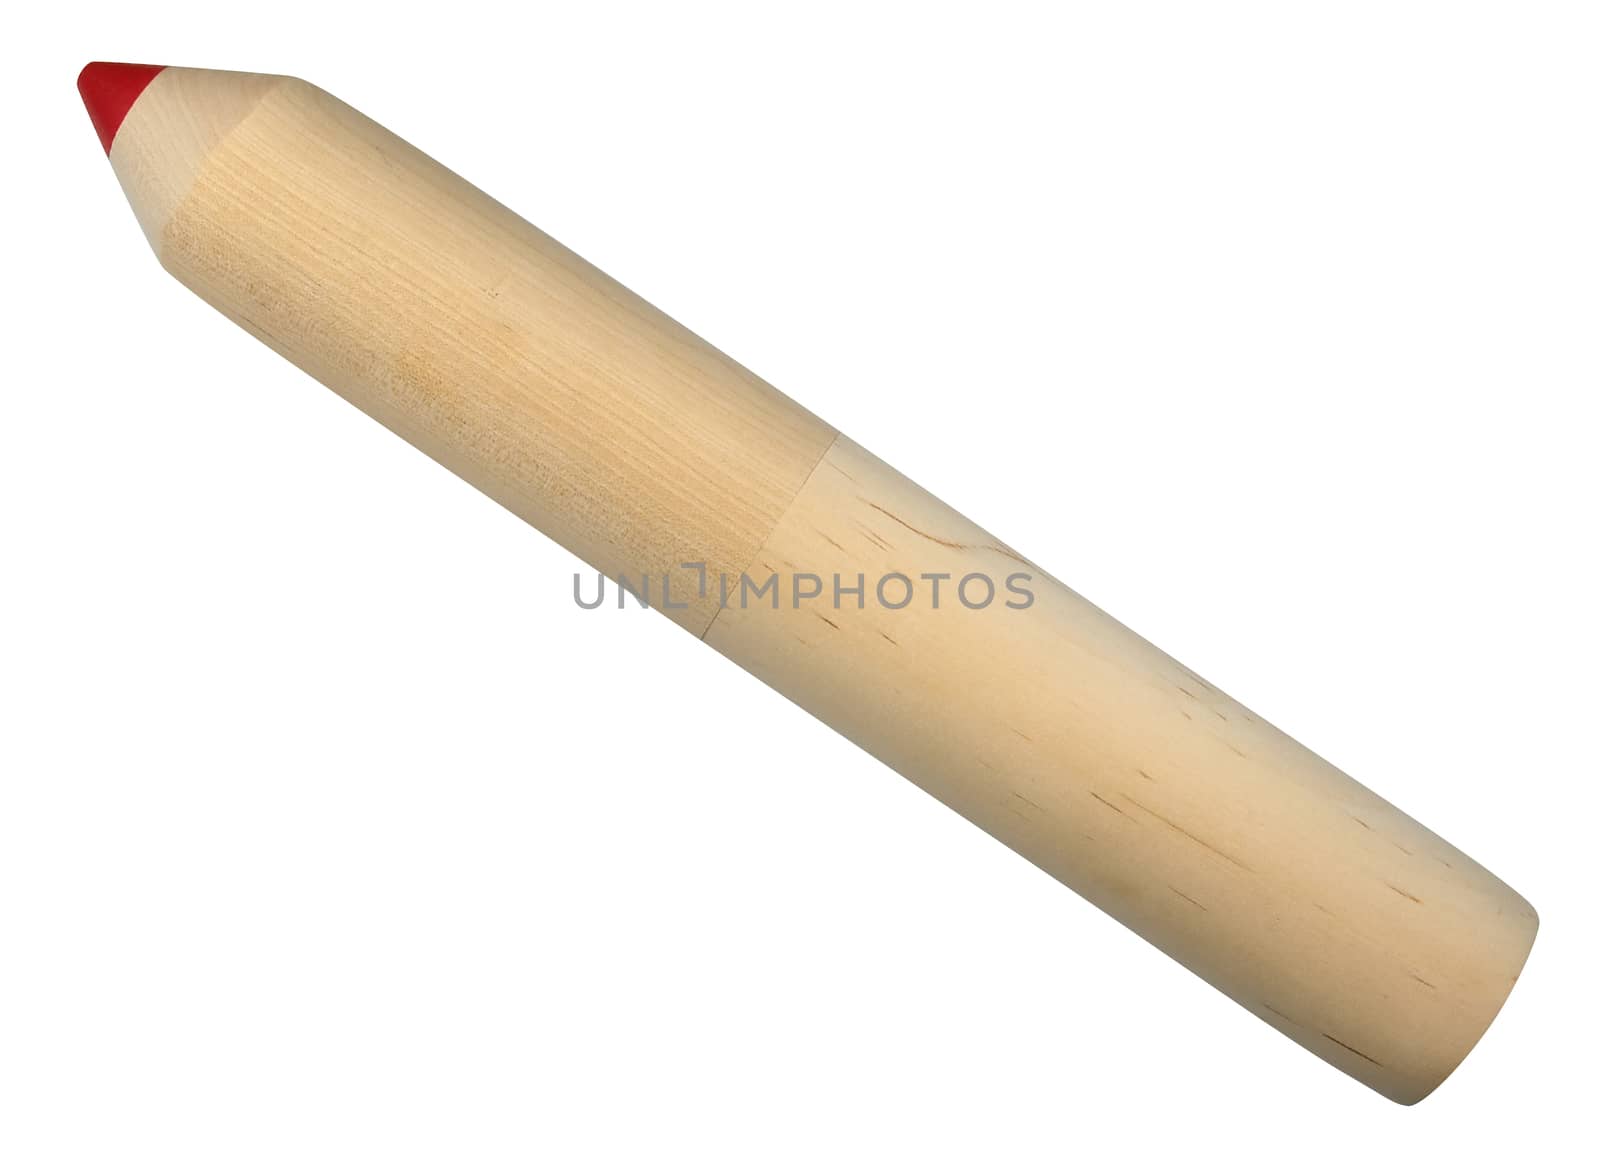 Big wooden pencil isolated over white with clipping path